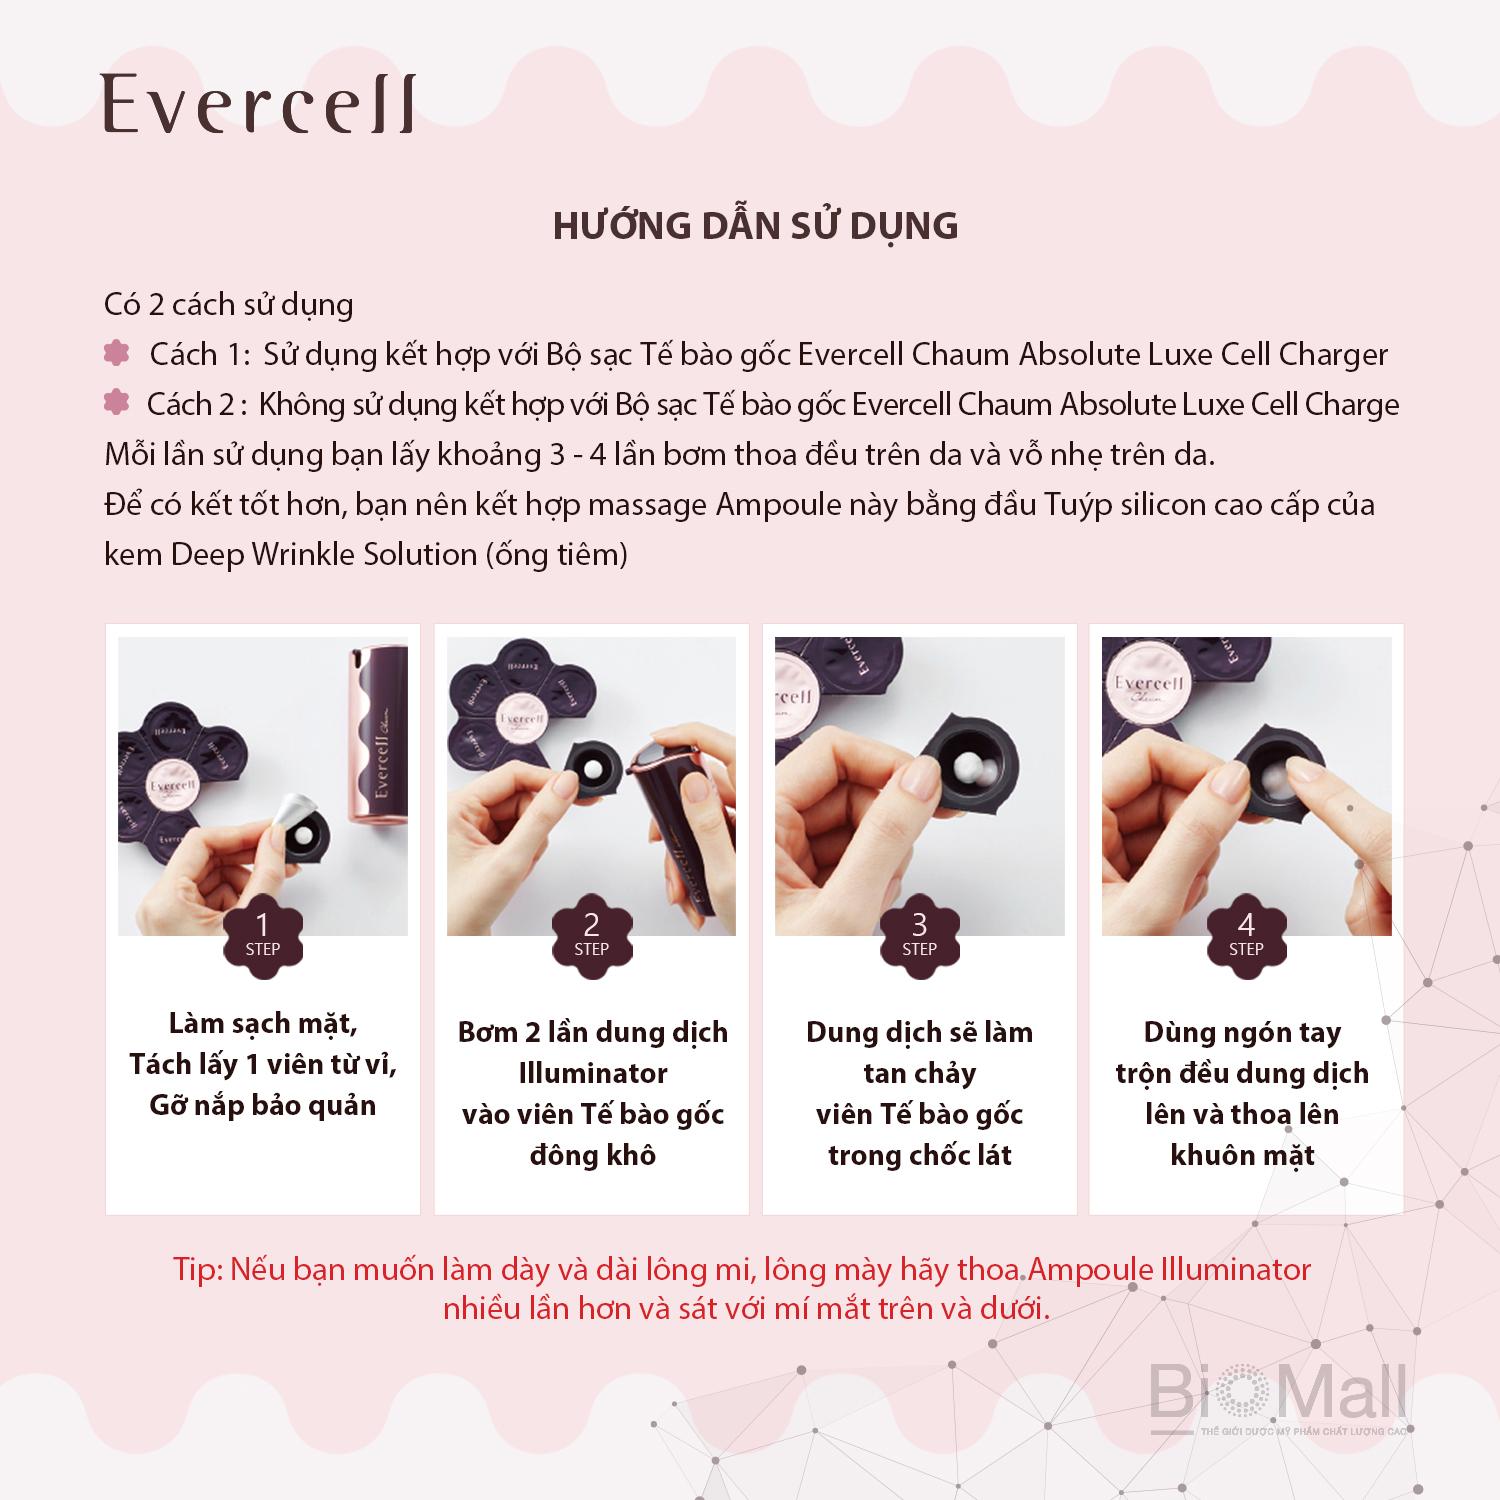 Evercell Chaum Absolute Luxe Cell Illuminator